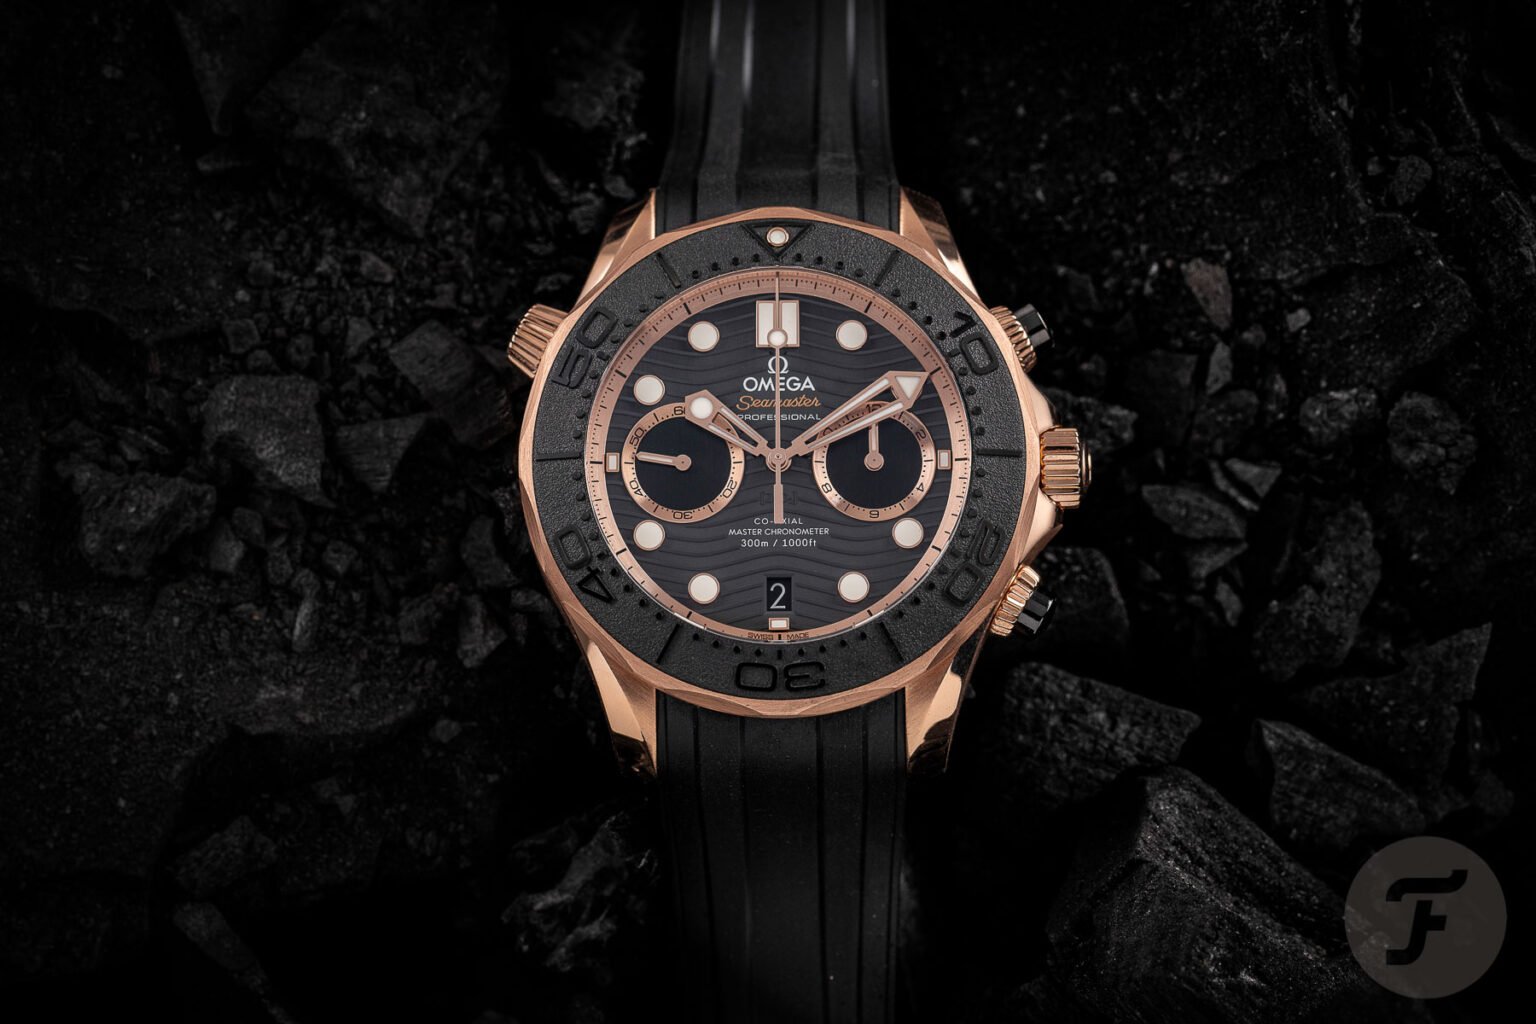 【F】 This Omega Seamaster Gold Chronograph Has Great Power